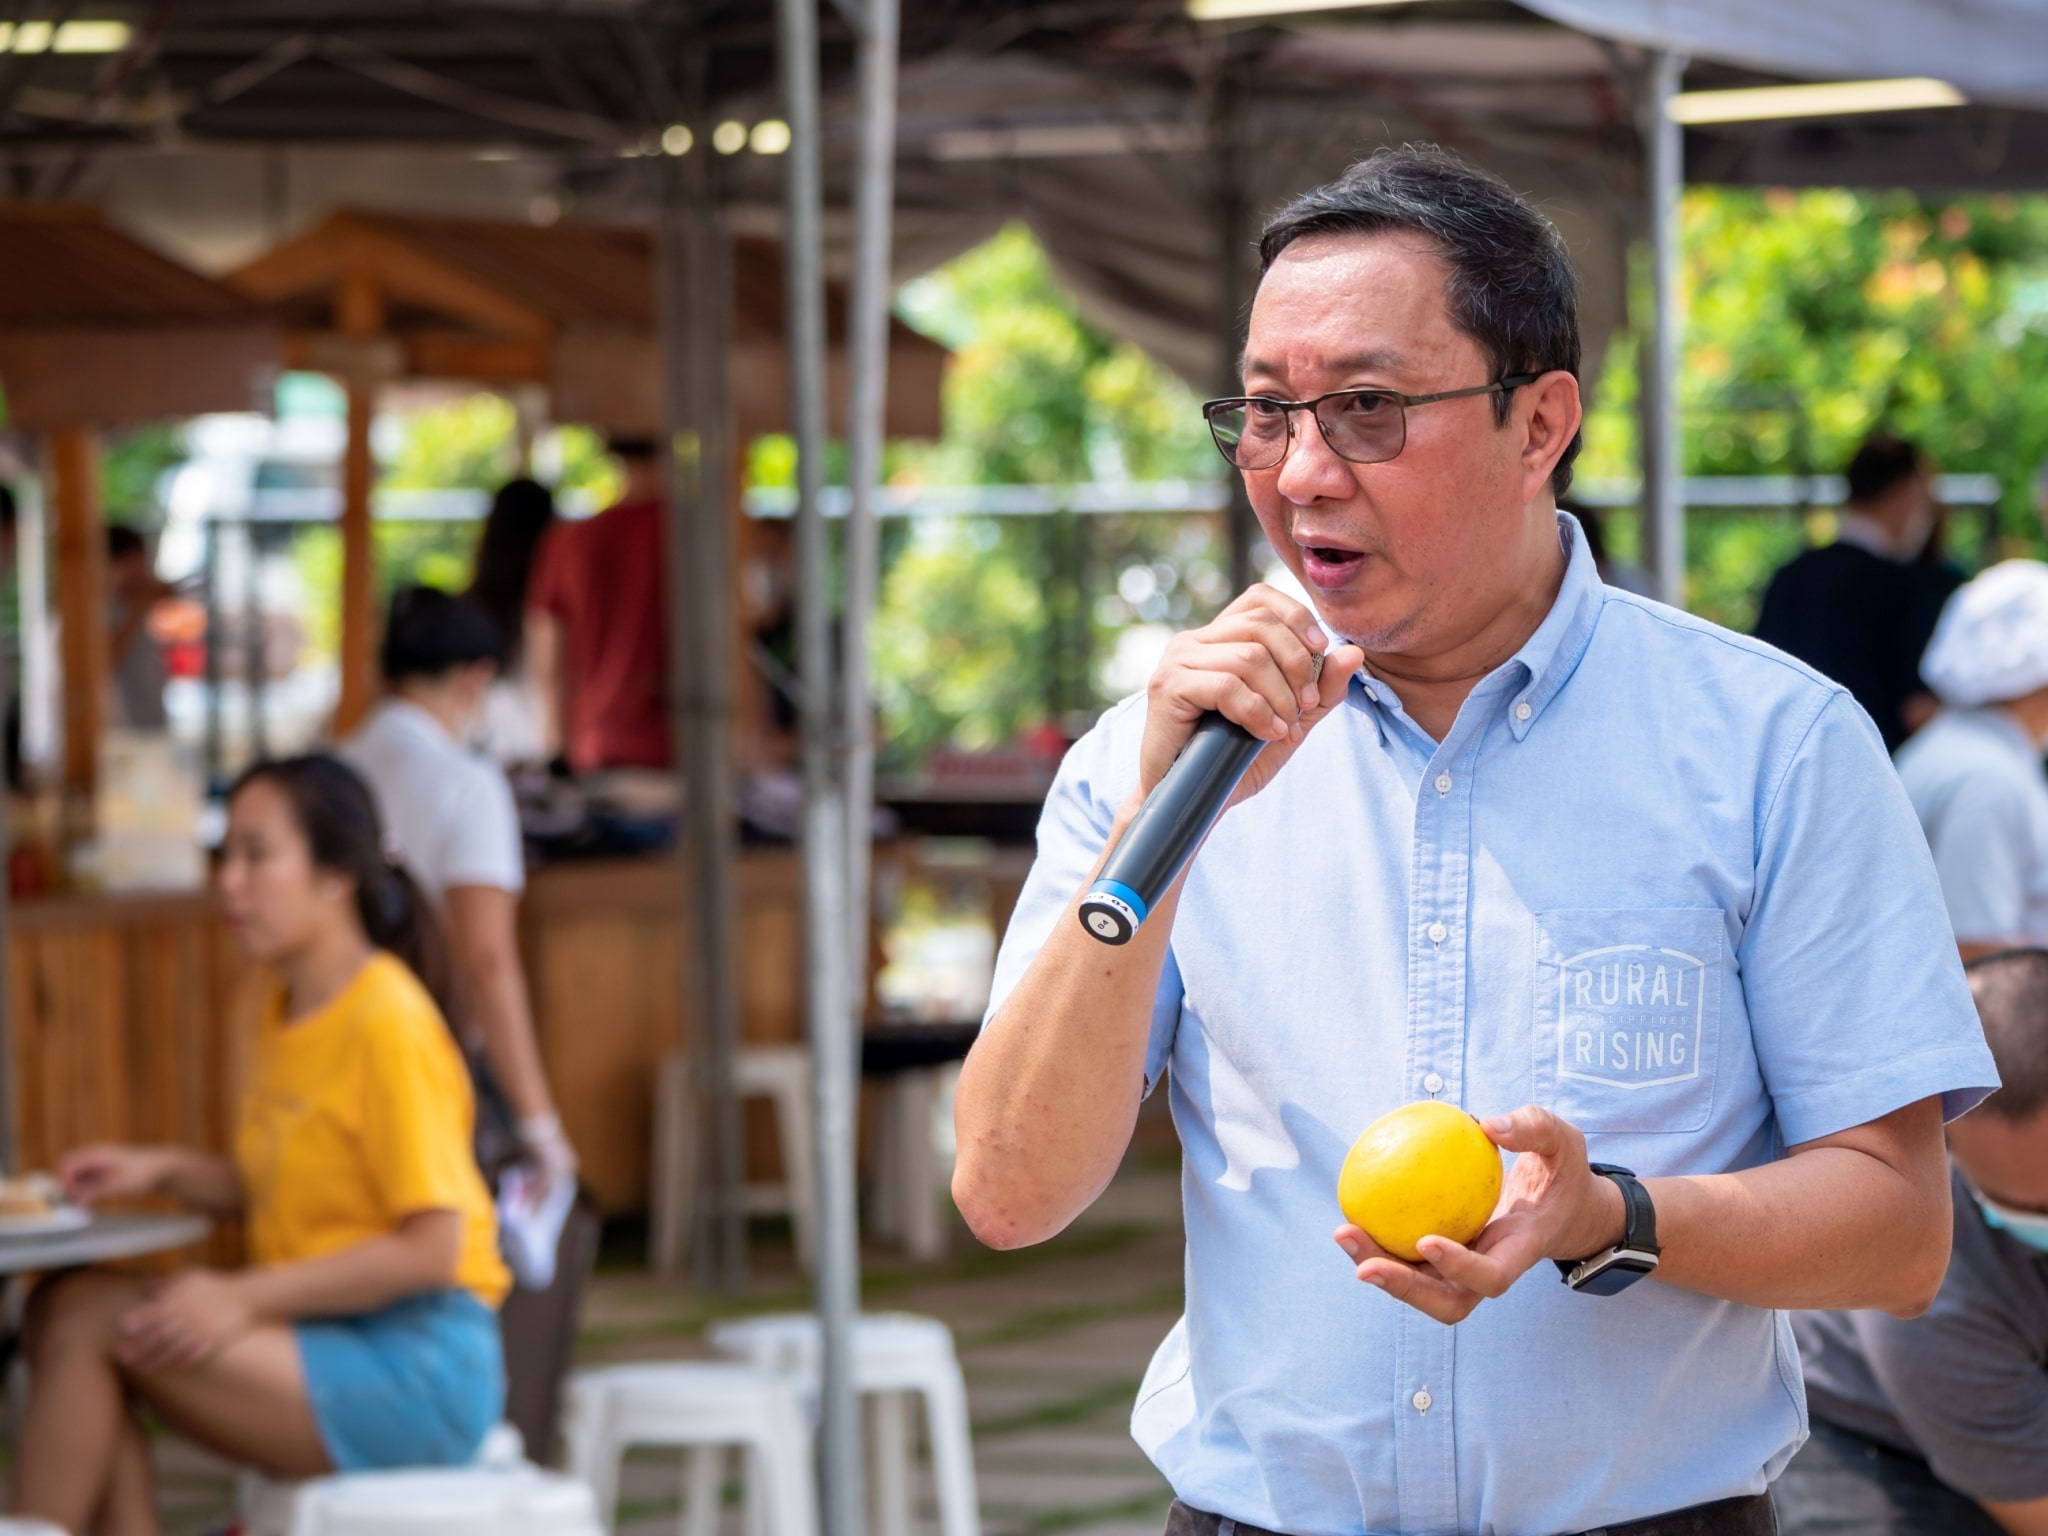 At Fiesta Verde ’22, Ace gives an impassioned speech about the plight of Filipino farmers.【Photo by Daniel Lazar】